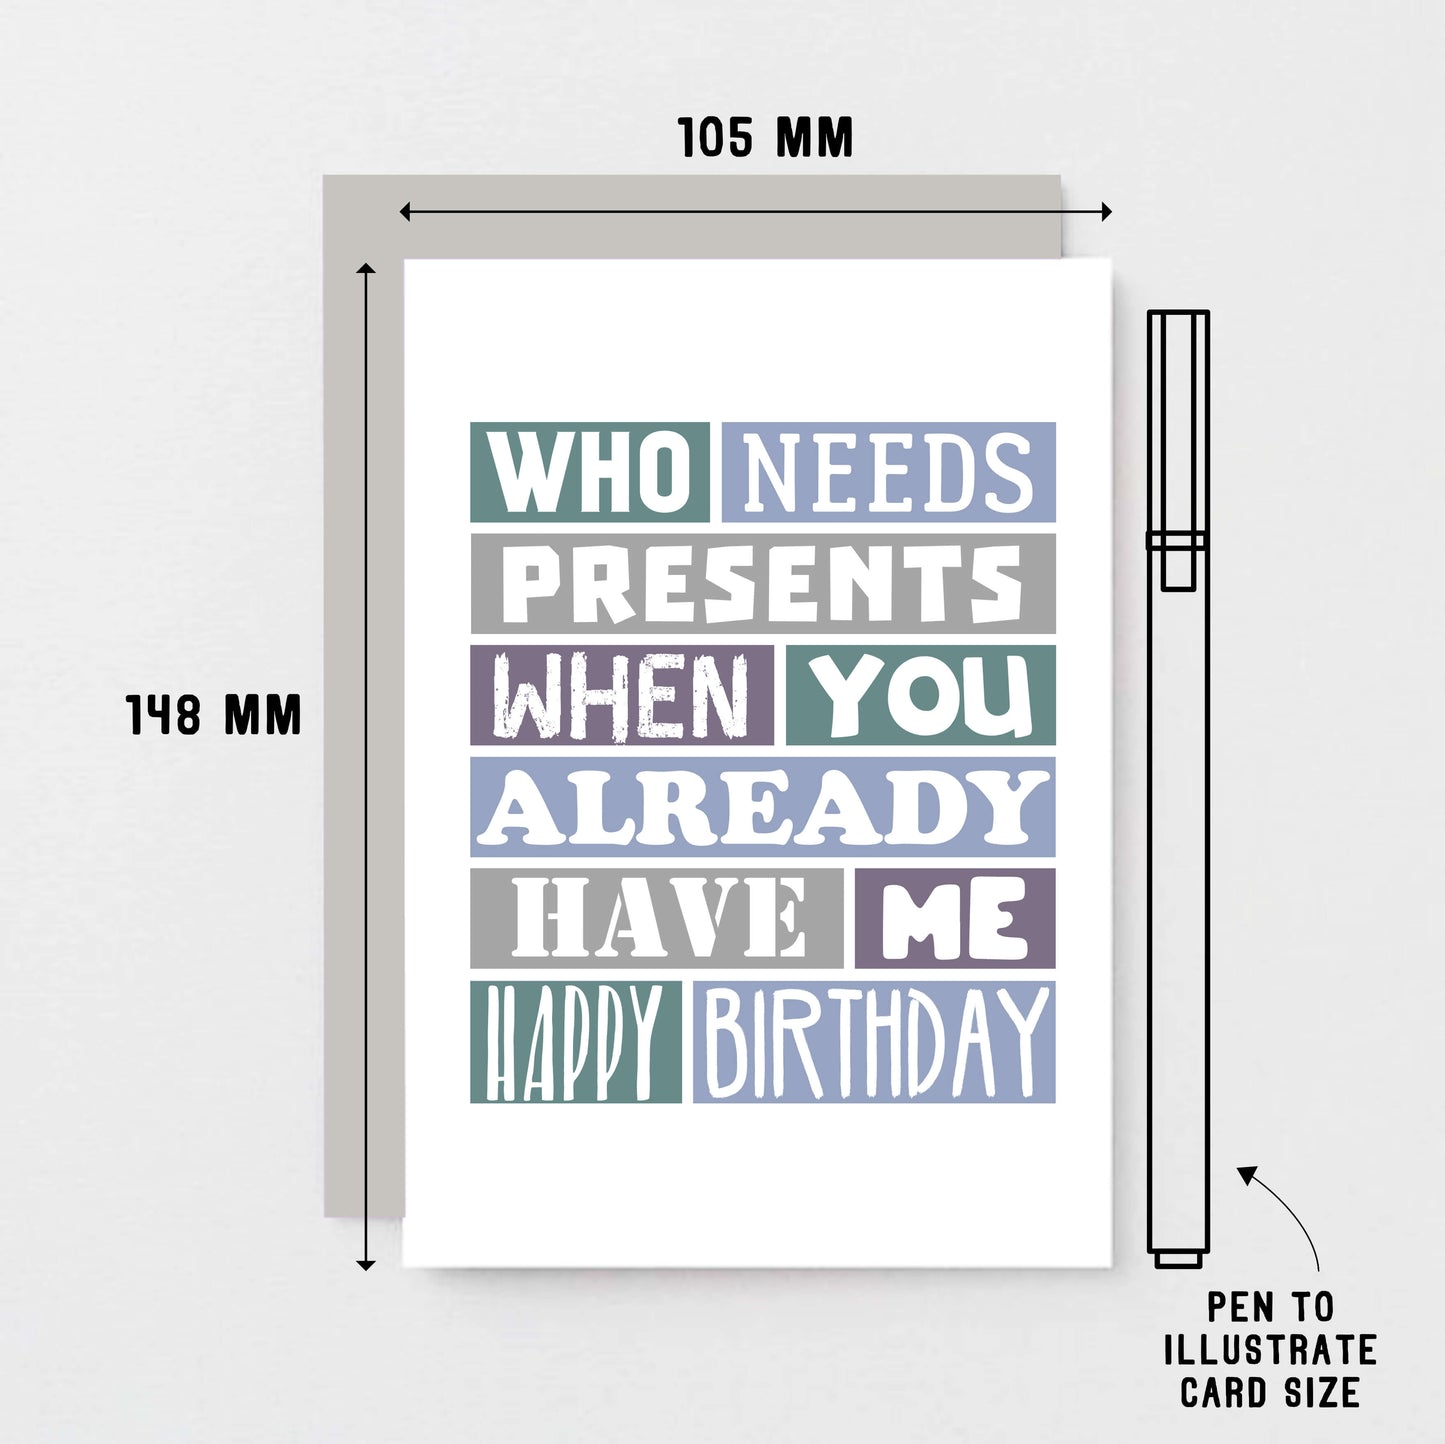 Funny Birthday Card by SixElevenCreations. Reads Who needs presents when you already have me. Happy birthday. Product Code SE0111A6